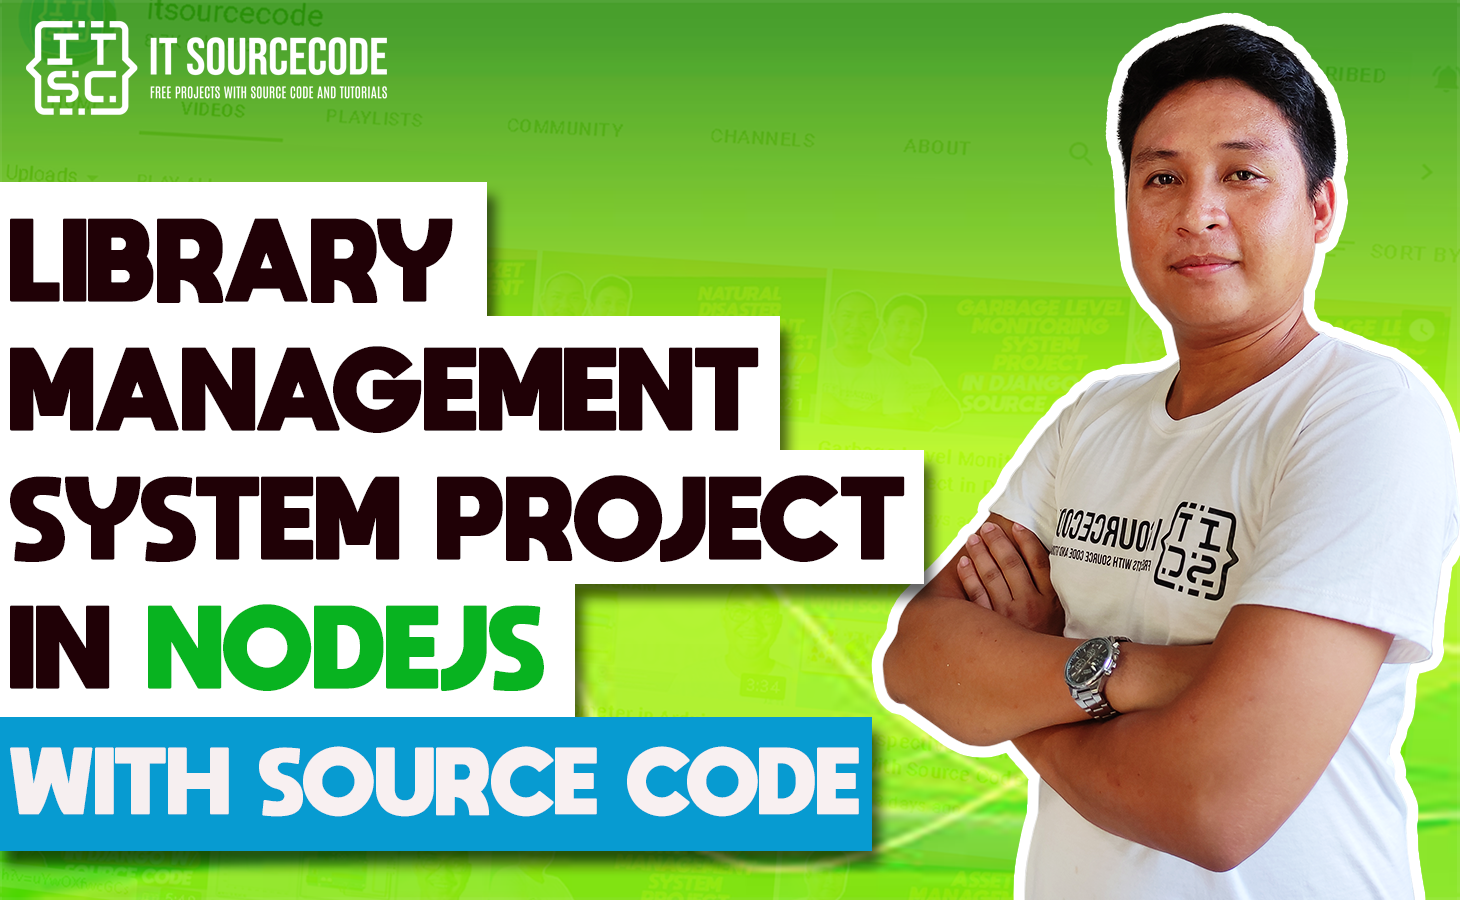 Library Management System Project in NodeJS with Source Code